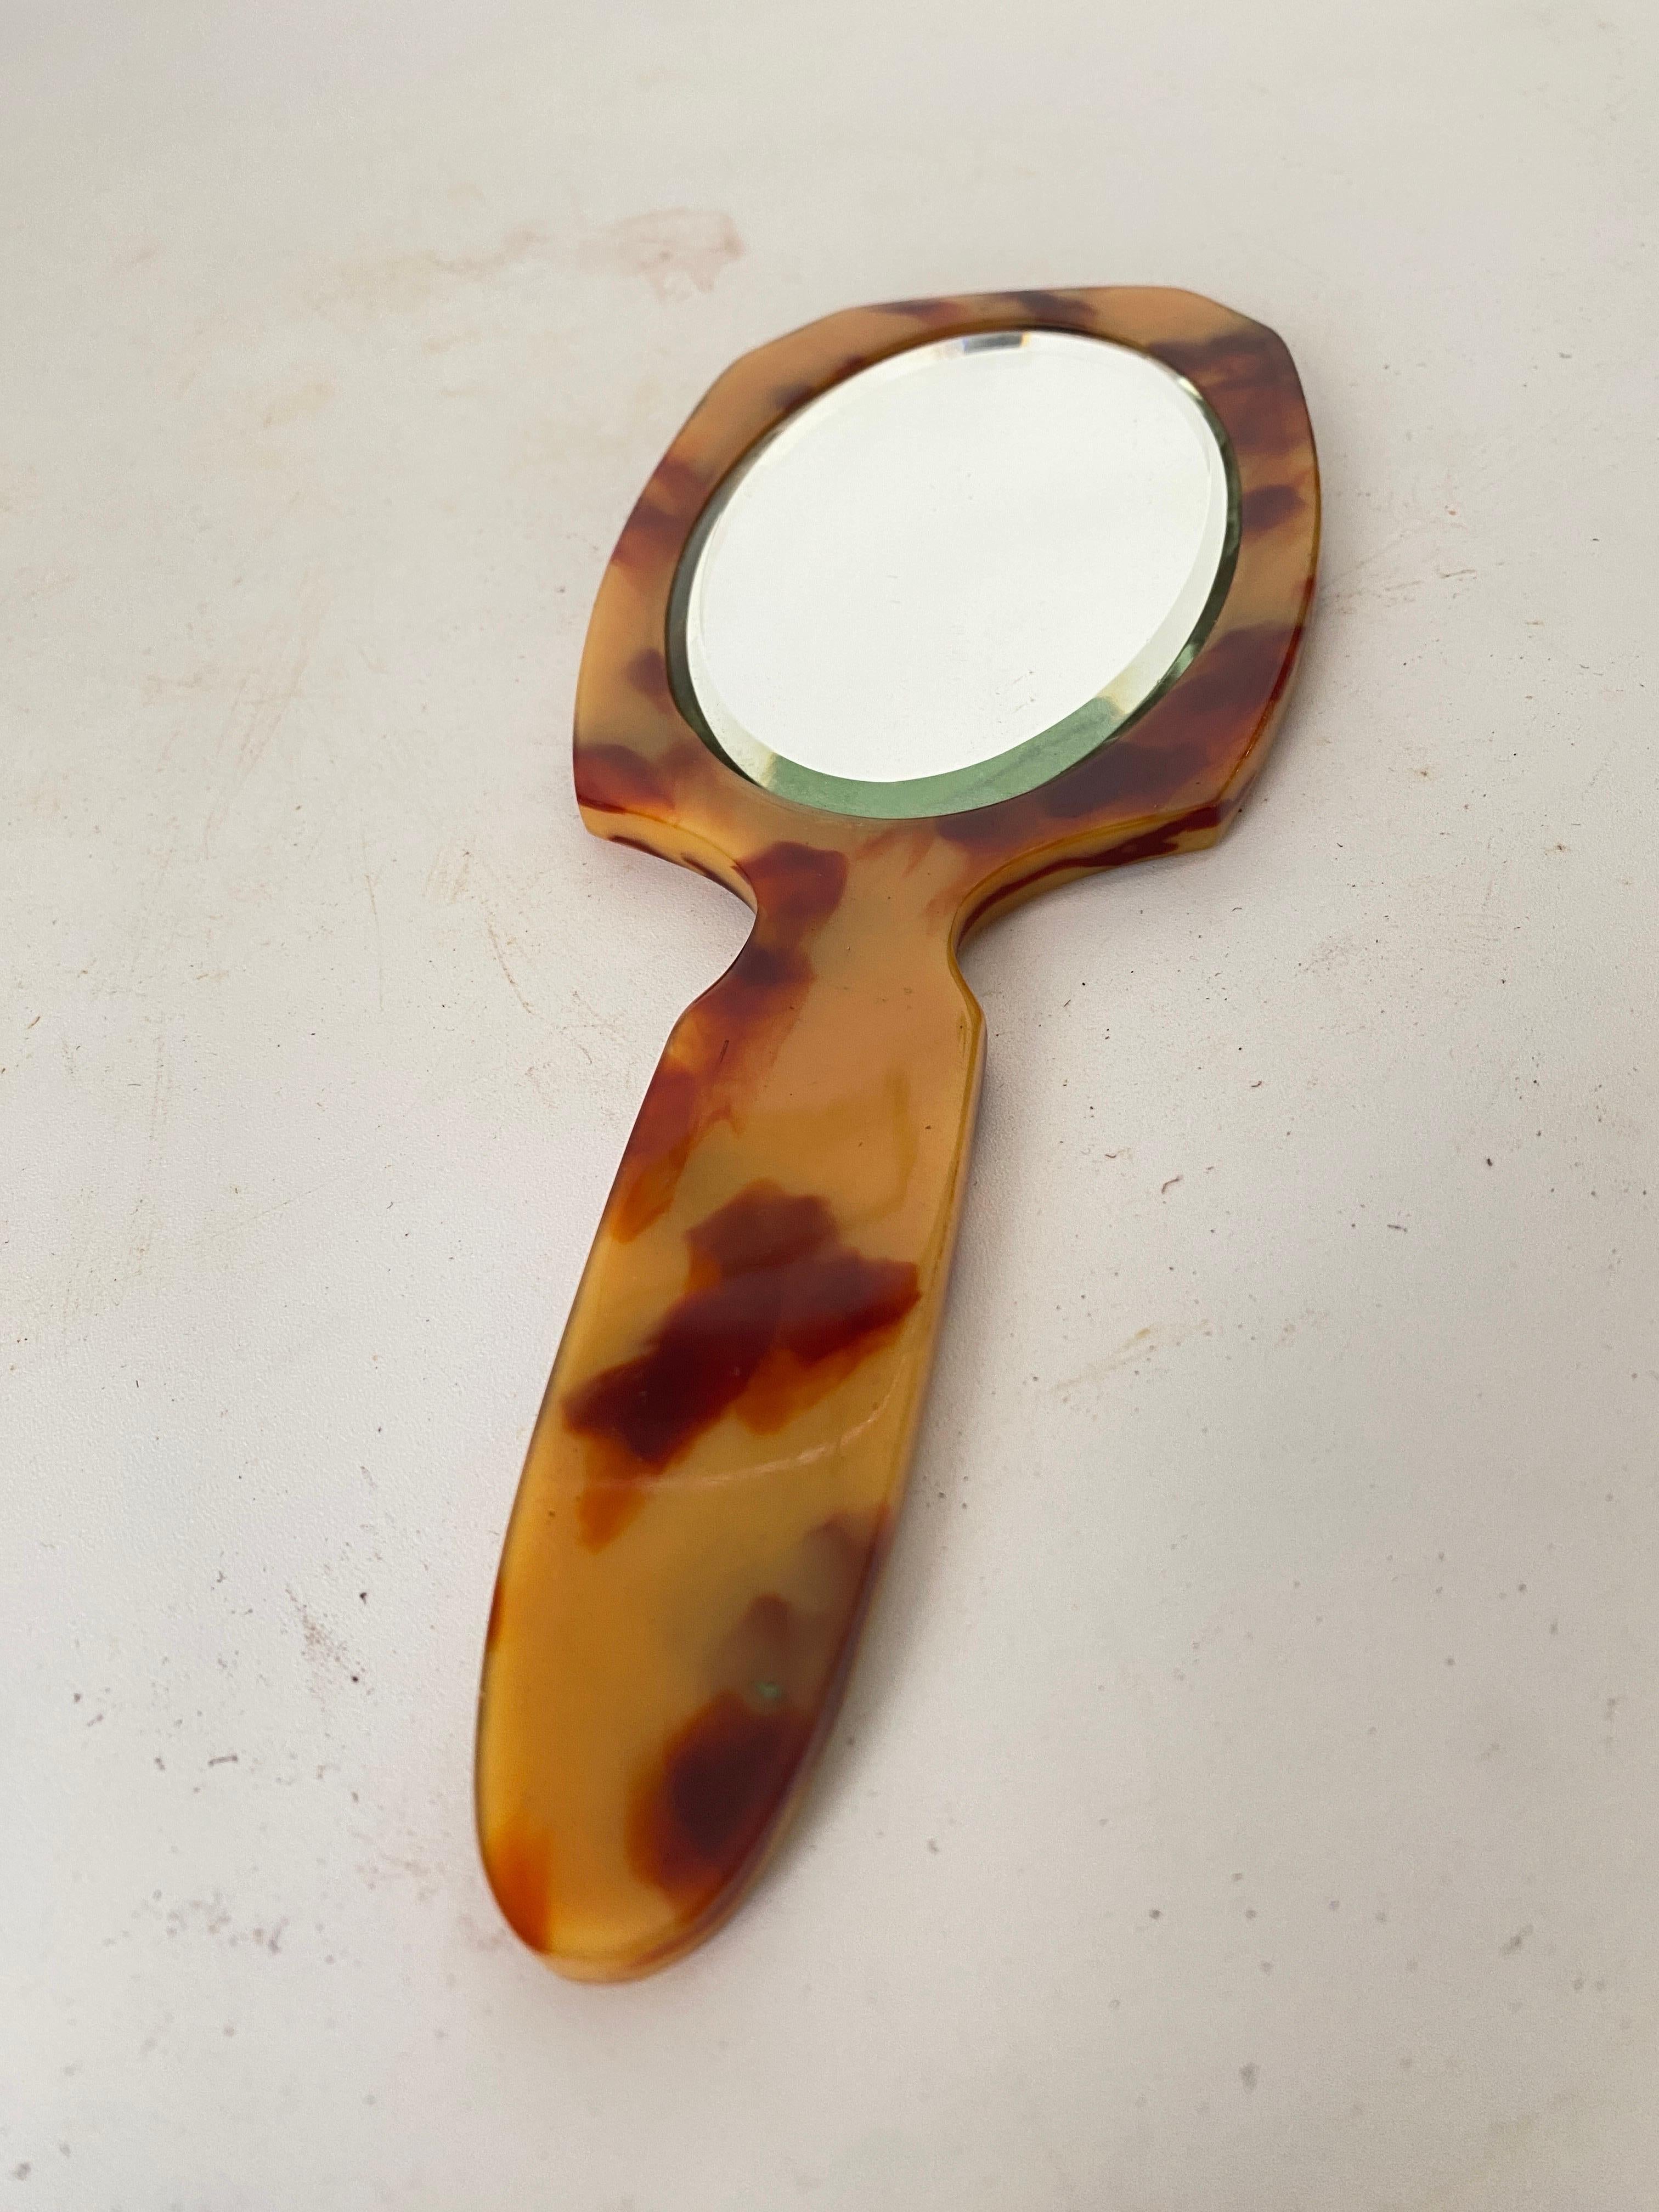 This mirror an hand mirror. In faux tortoise Bakelite. It has been made in France circa 1970.
Beige and Brown color.